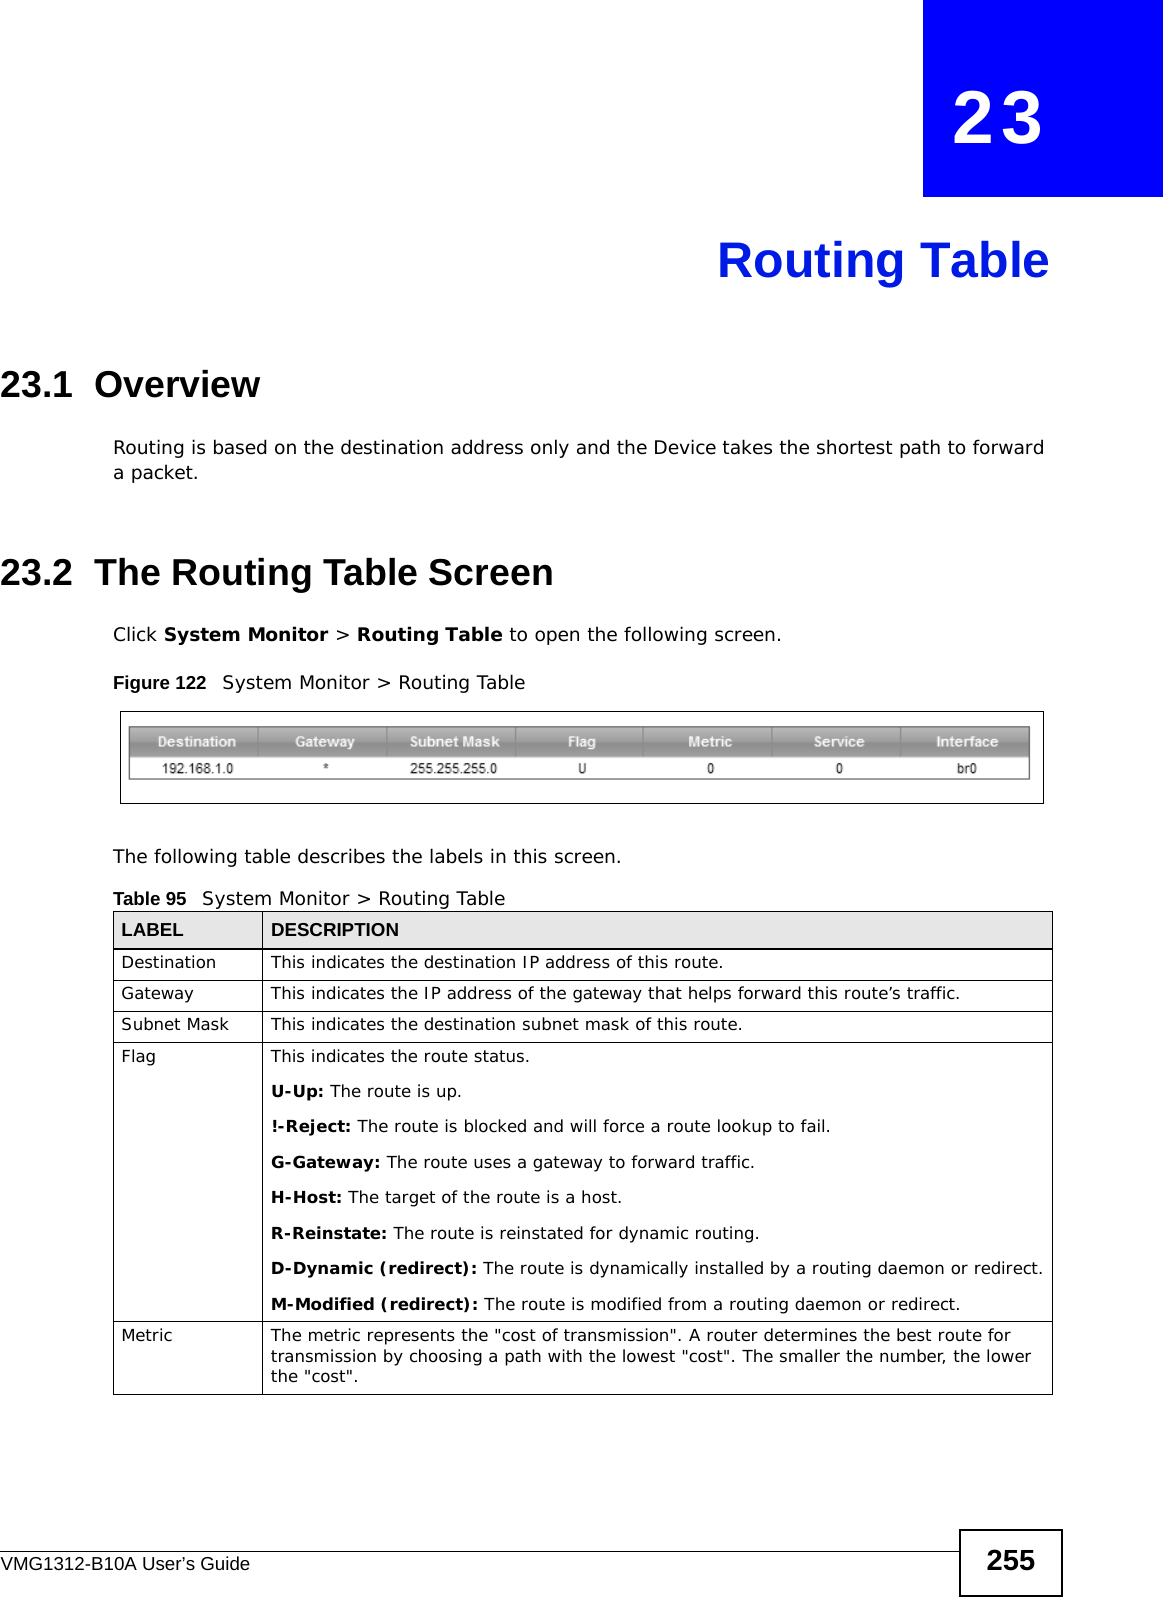 VMG1312-B10A User’s Guide 255CHAPTER   23Routing Table23.1  OverviewRouting is based on the destination address only and the Device takes the shortest path to forward a packet.23.2  The Routing Table ScreenClick System Monitor &gt; Routing Table to open the following screen.Figure 122   System Monitor &gt; Routing TableThe following table describes the labels in this screen.Table 95   System Monitor &gt; Routing TableLABEL DESCRIPTIONDestination This indicates the destination IP address of this route.Gateway This indicates the IP address of the gateway that helps forward this route’s traffic.Subnet Mask This indicates the destination subnet mask of this route.Flag This indicates the route status.U-Up: The route is up.!-Reject: The route is blocked and will force a route lookup to fail.G-Gateway: The route uses a gateway to forward traffic. H-Host: The target of the route is a host.R-Reinstate: The route is reinstated for dynamic routing.D-Dynamic (redirect): The route is dynamically installed by a routing daemon or redirect.M-Modified (redirect): The route is modified from a routing daemon or redirect.Metric The metric represents the &quot;cost of transmission&quot;. A router determines the best route for transmission by choosing a path with the lowest &quot;cost&quot;. The smaller the number, the lower the &quot;cost&quot;.